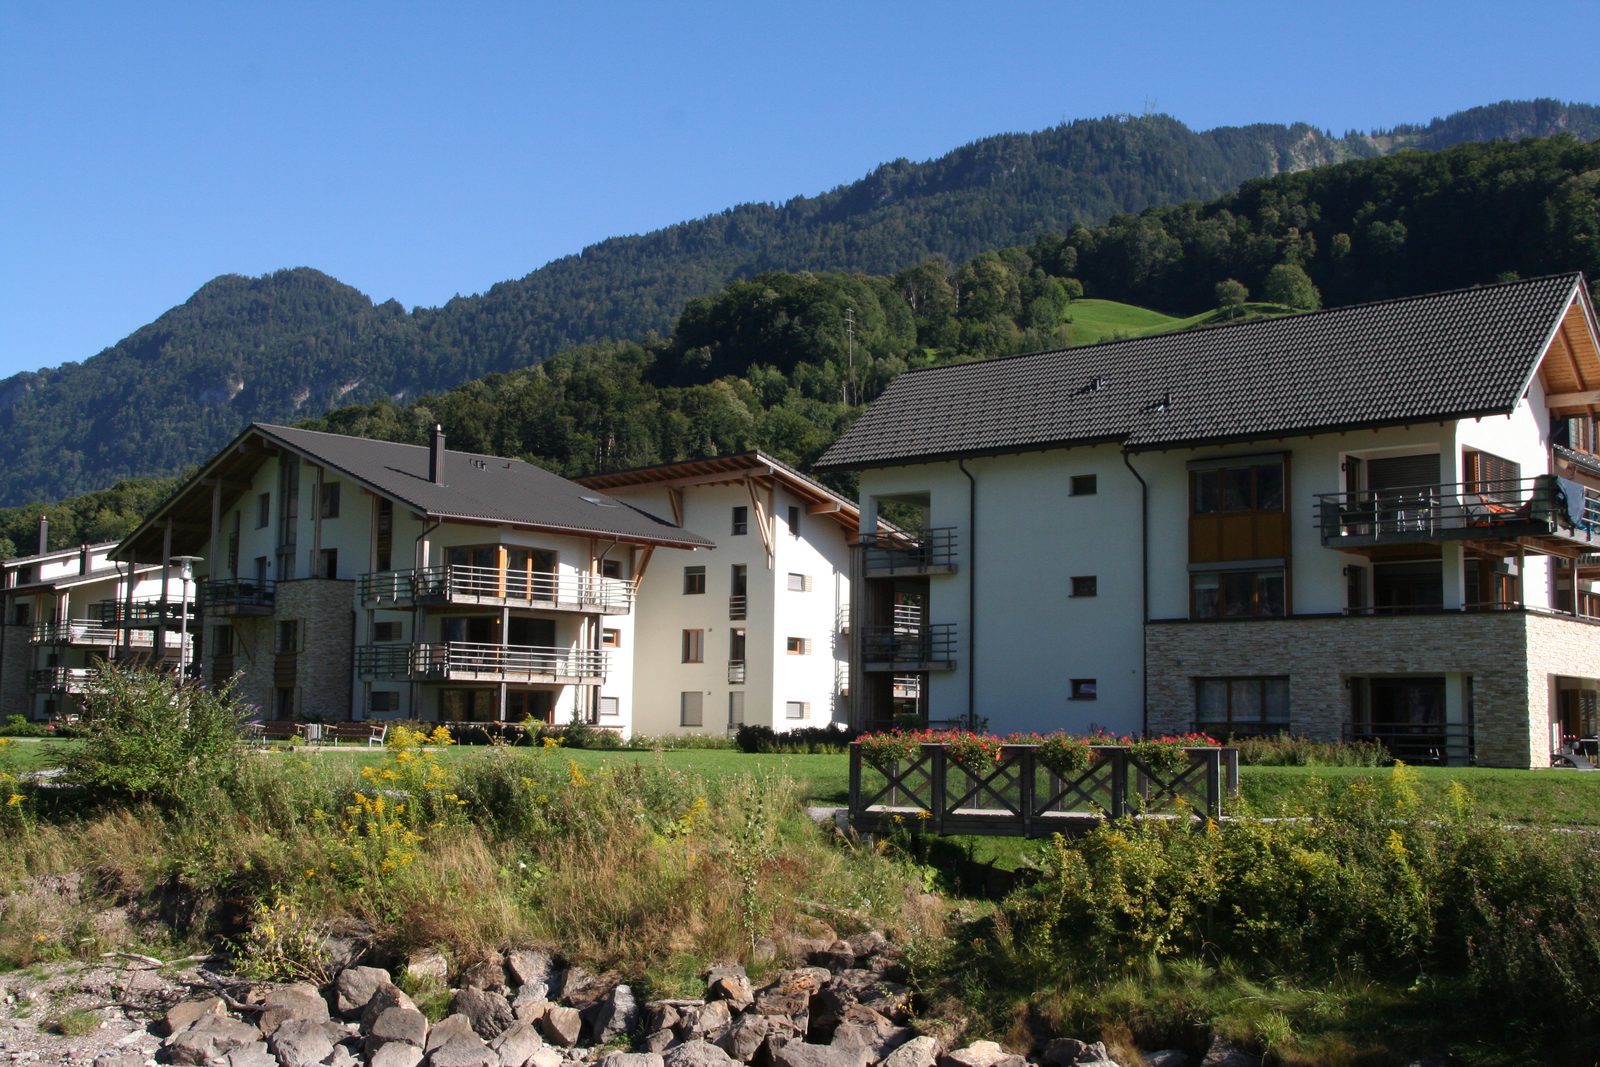 Holiday homes of Walensee Apartment directly at the lake, on Resort Walensee Heidiland Flumserberg Switzerland in the autumn break